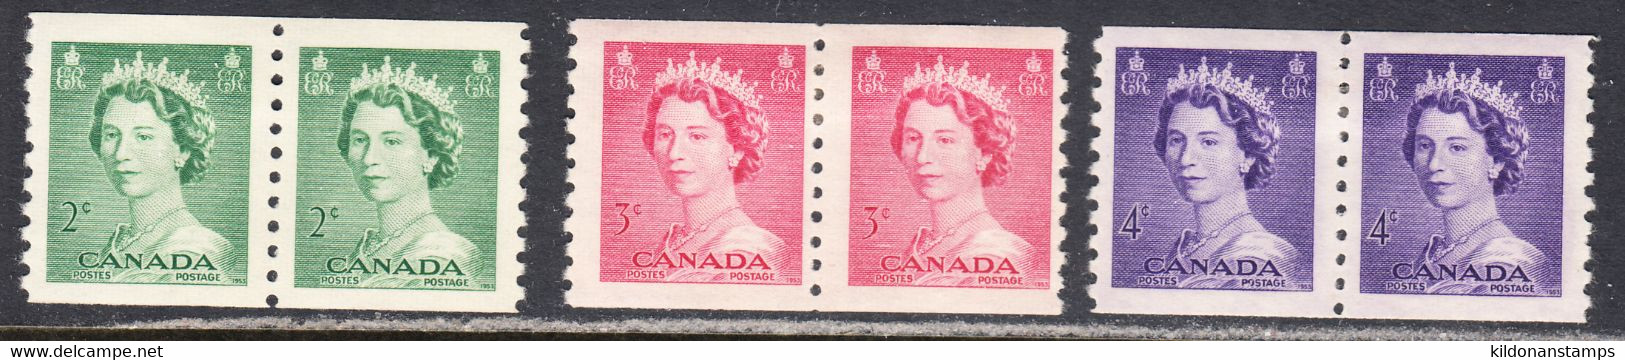 Canada 1953 Coils, Mint Mounted, Sc# 331-333, SG - Coil Stamps